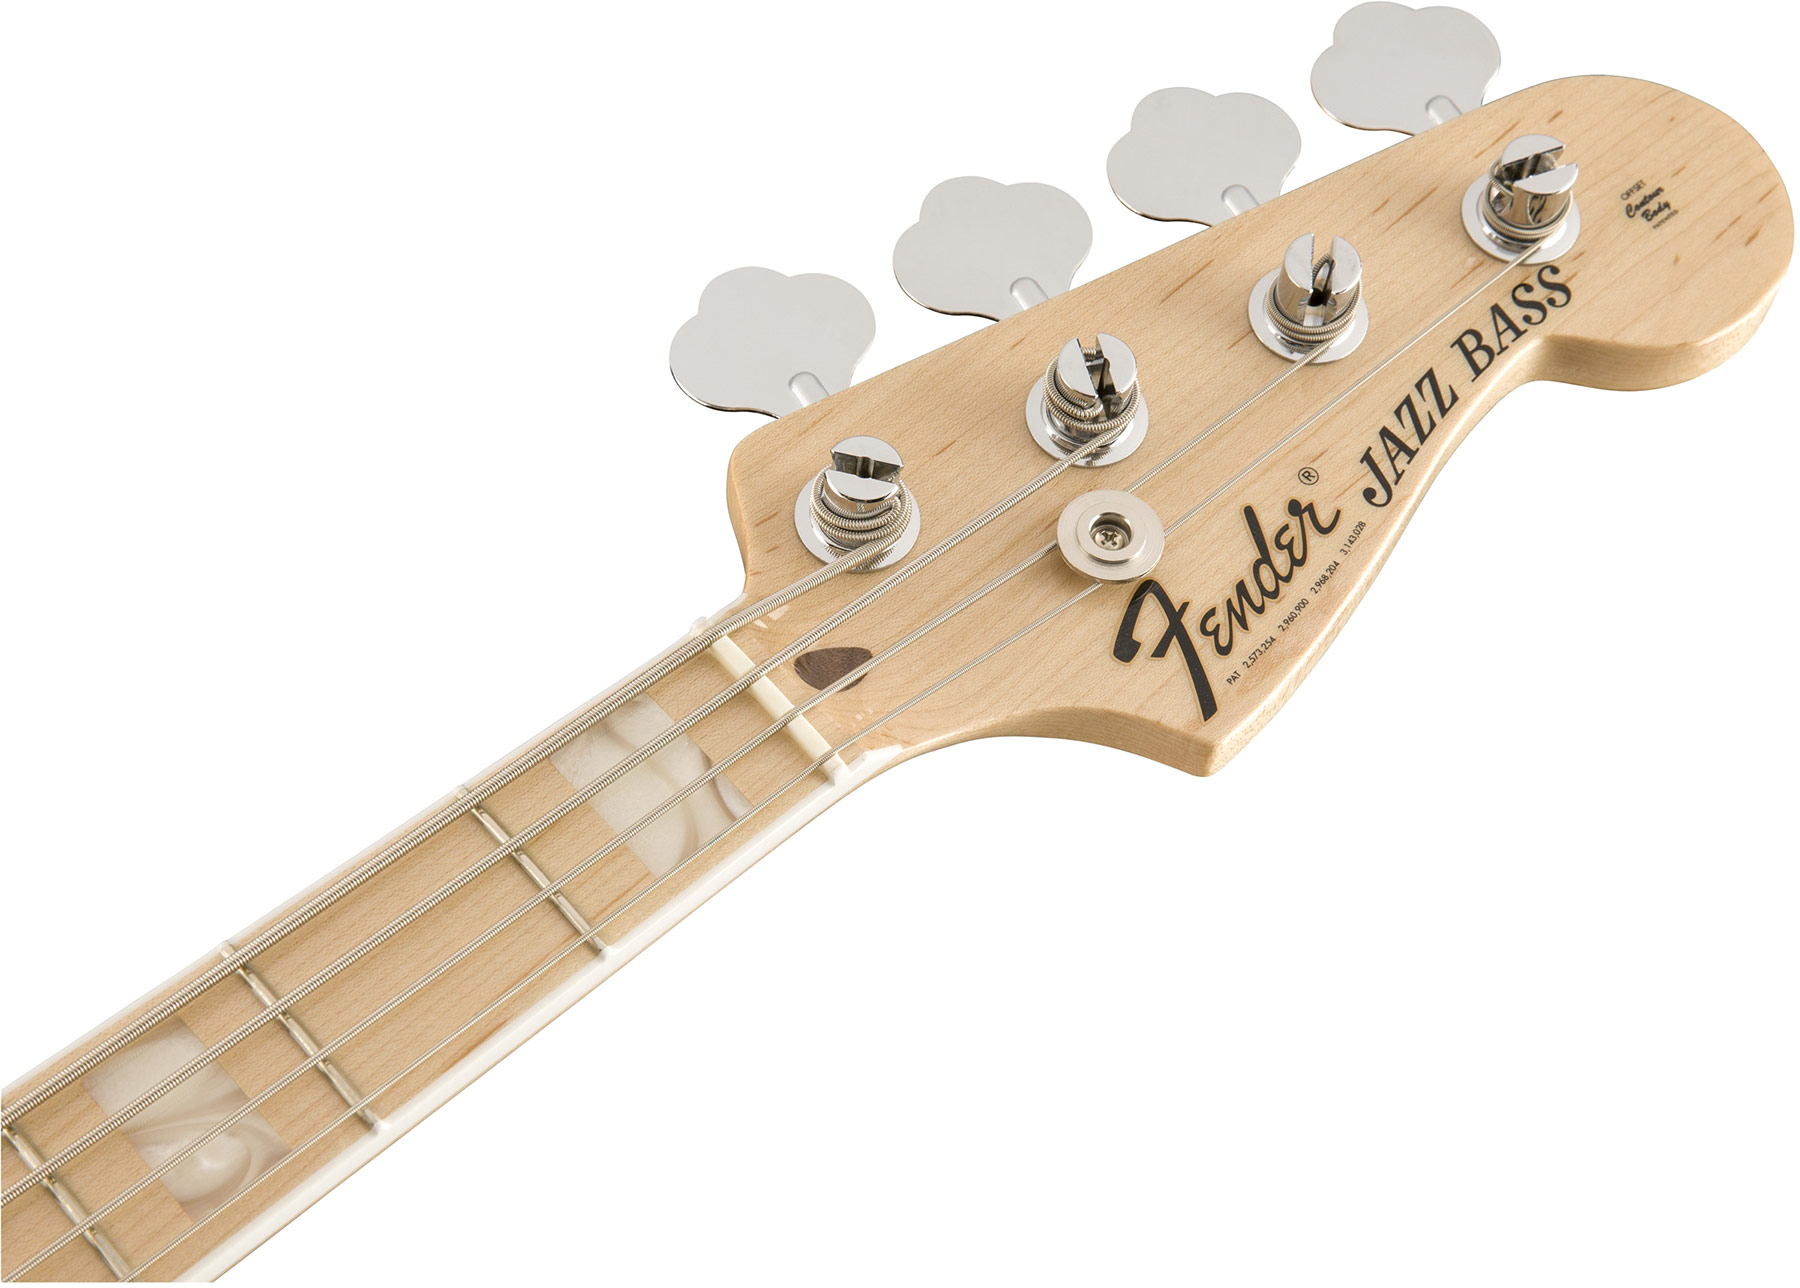 Fender Jazz Bass '70s American Original Usa Mn - Natural - Solid body electric bass - Variation 1